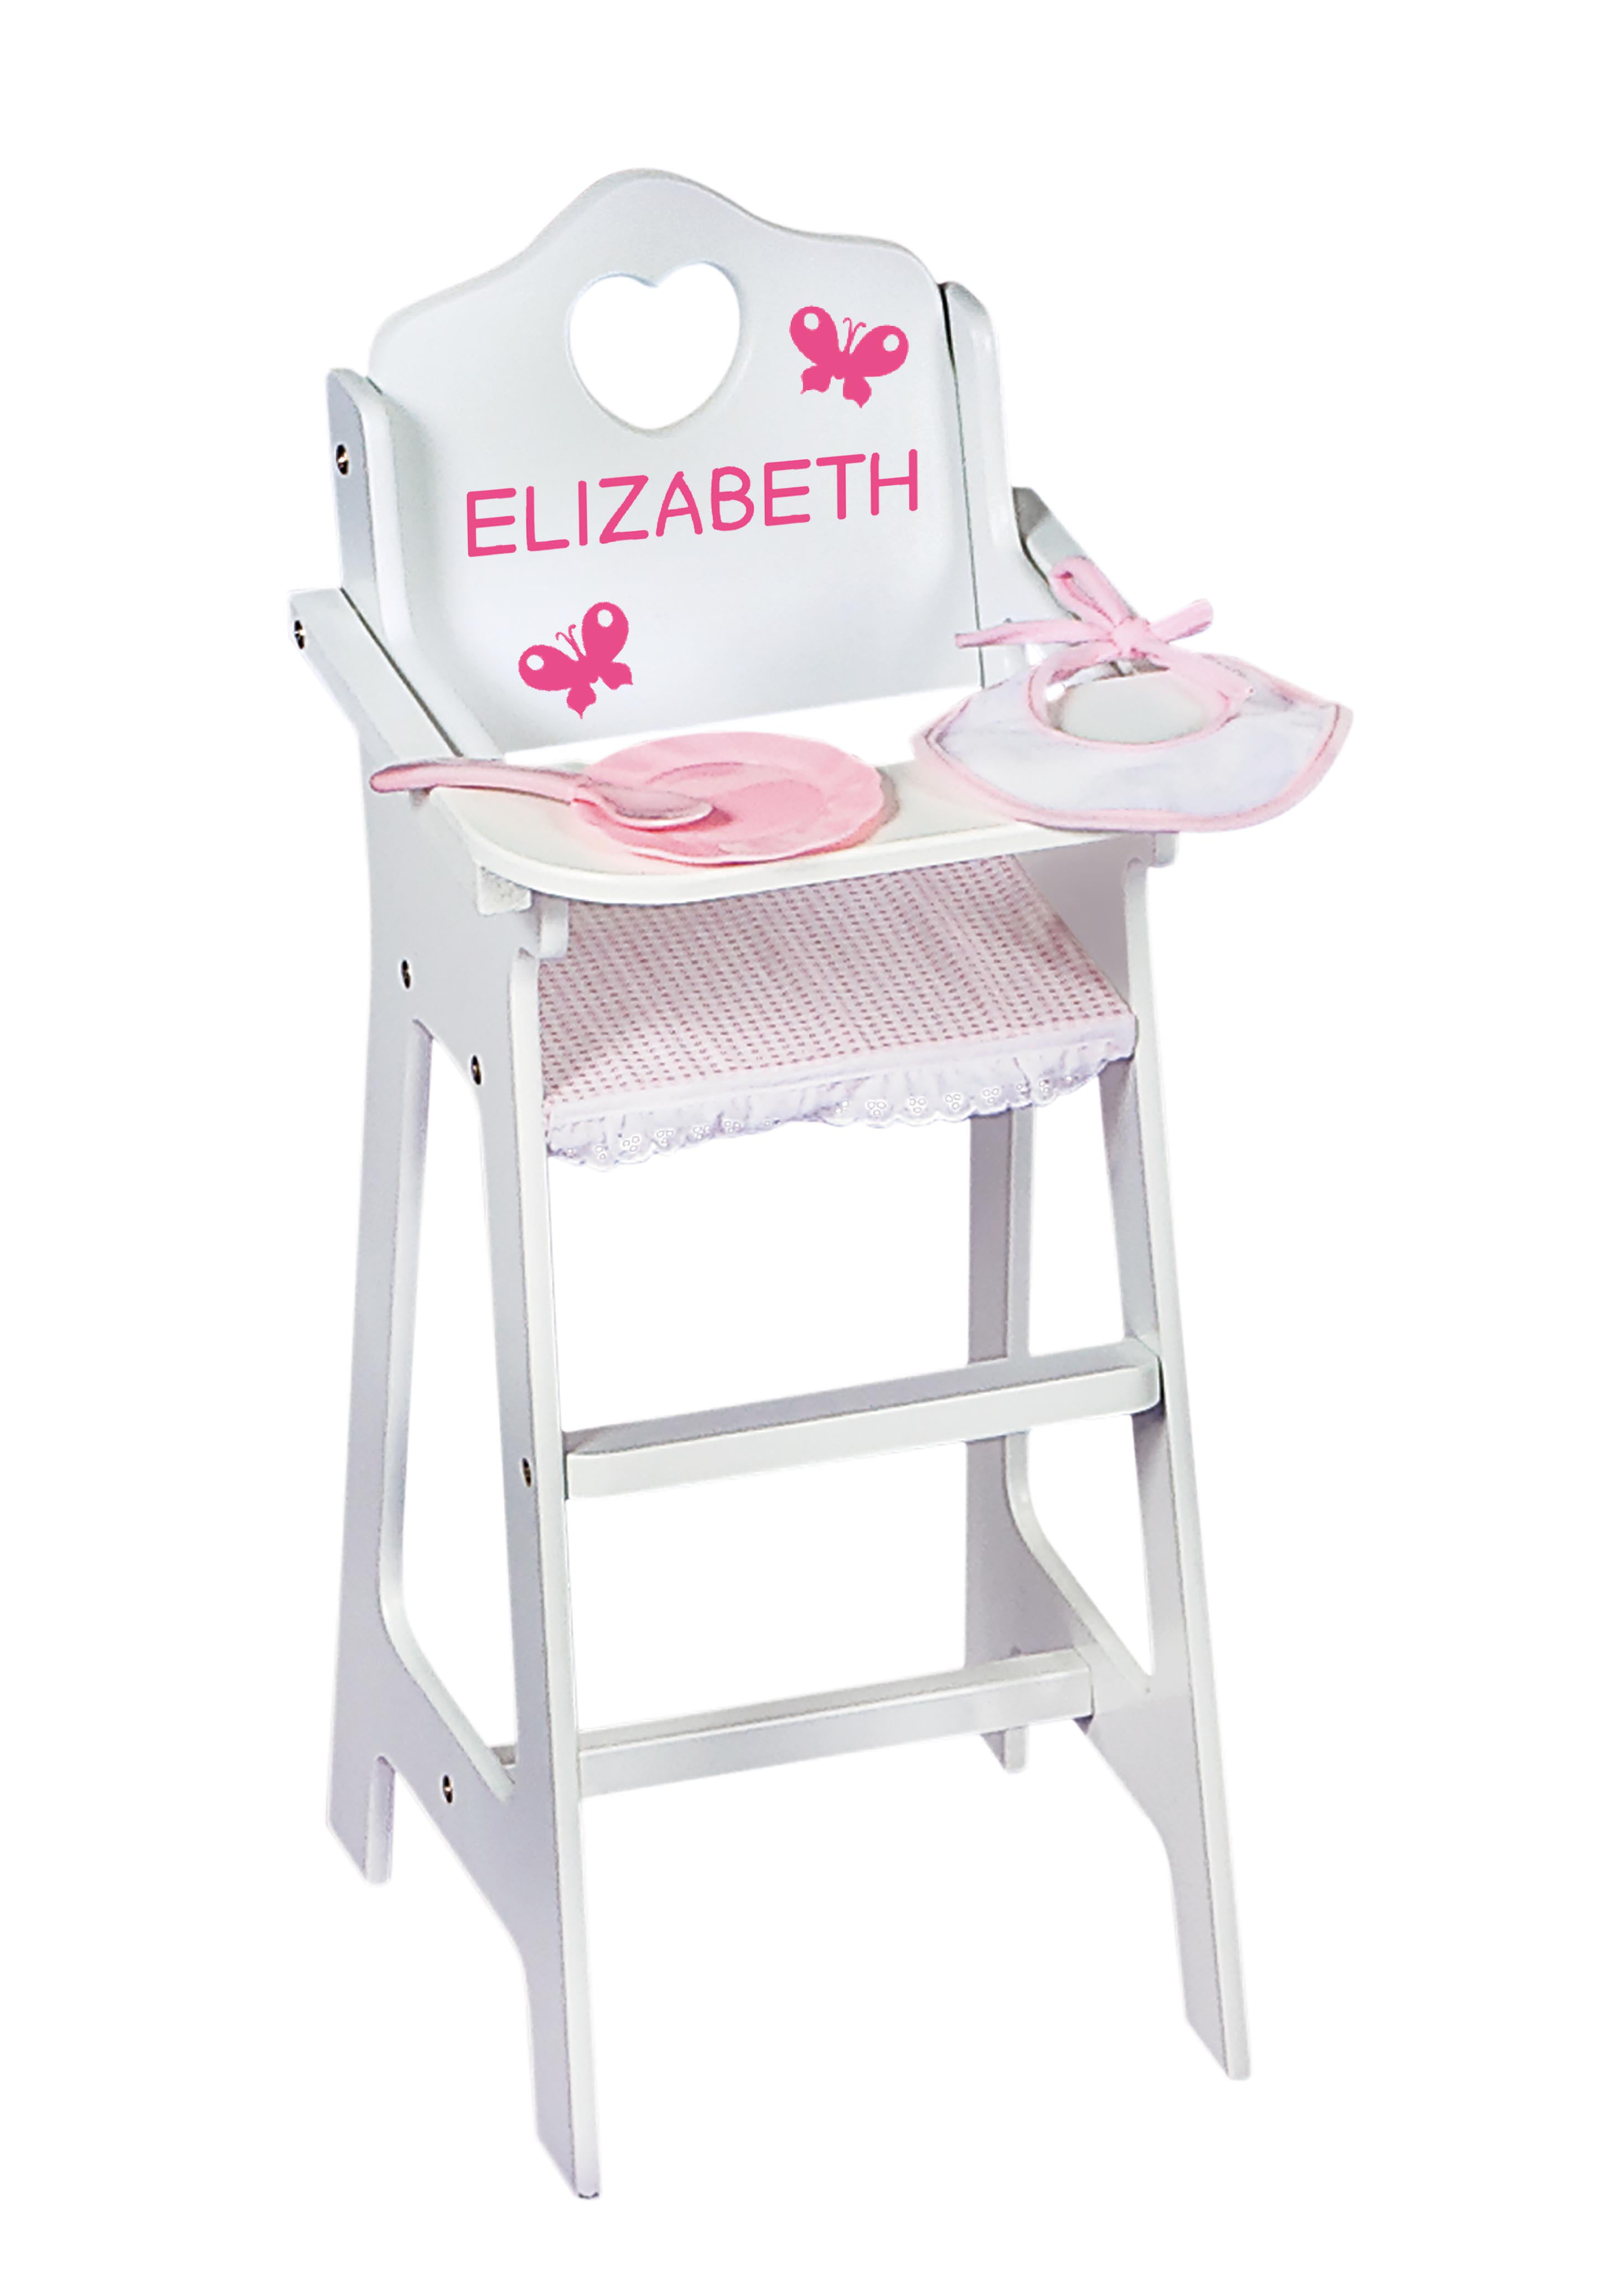 baby doll high chair and stroller